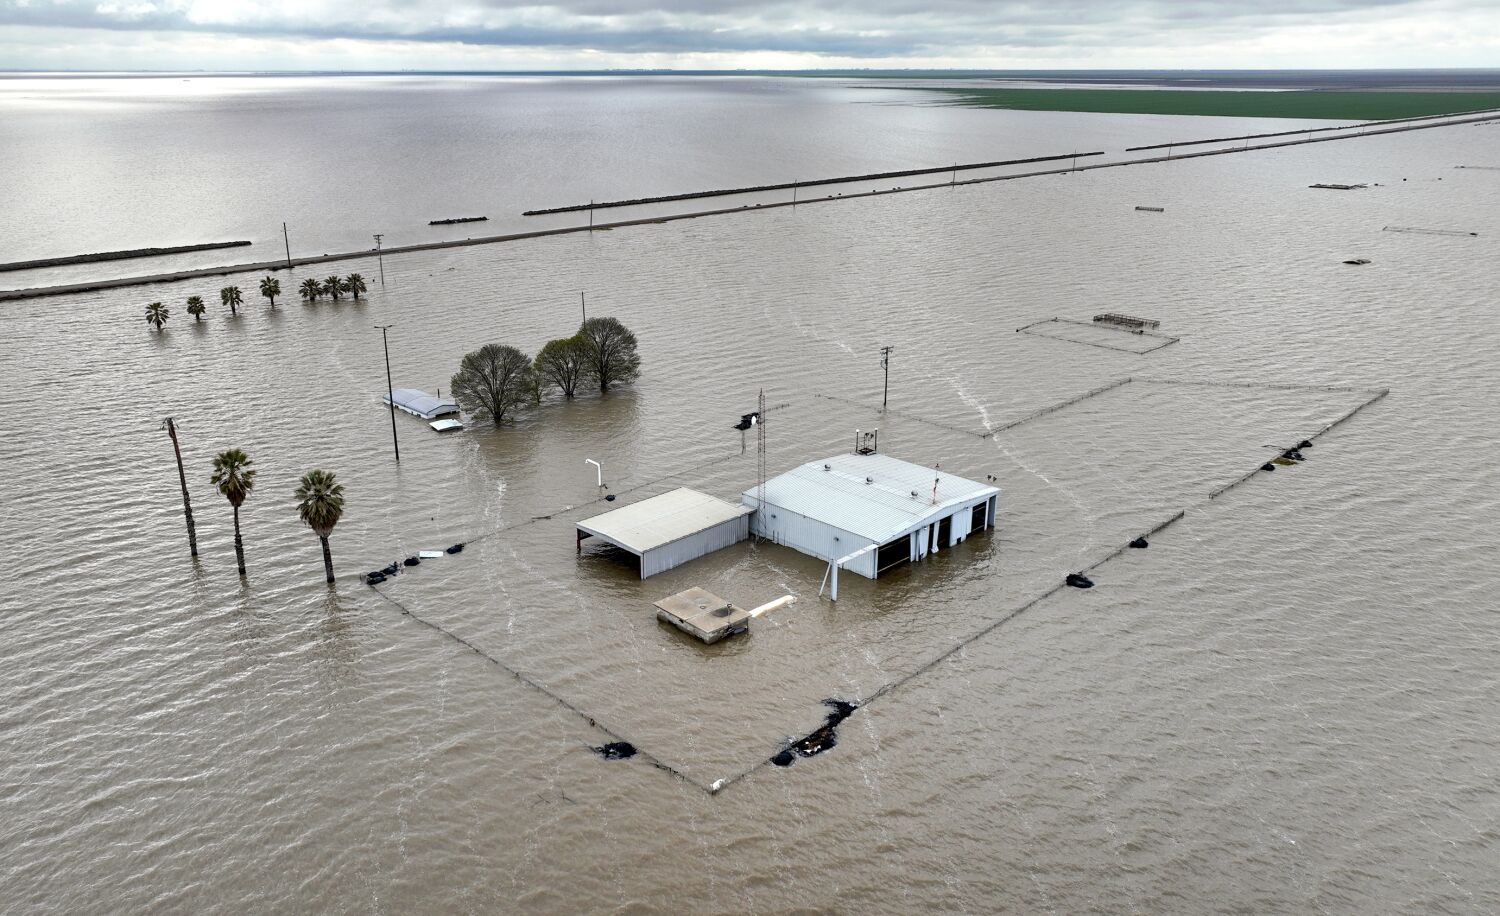 Risk of 'catastrophic flooding' has diminished in Tulare Lake Basin, officials say